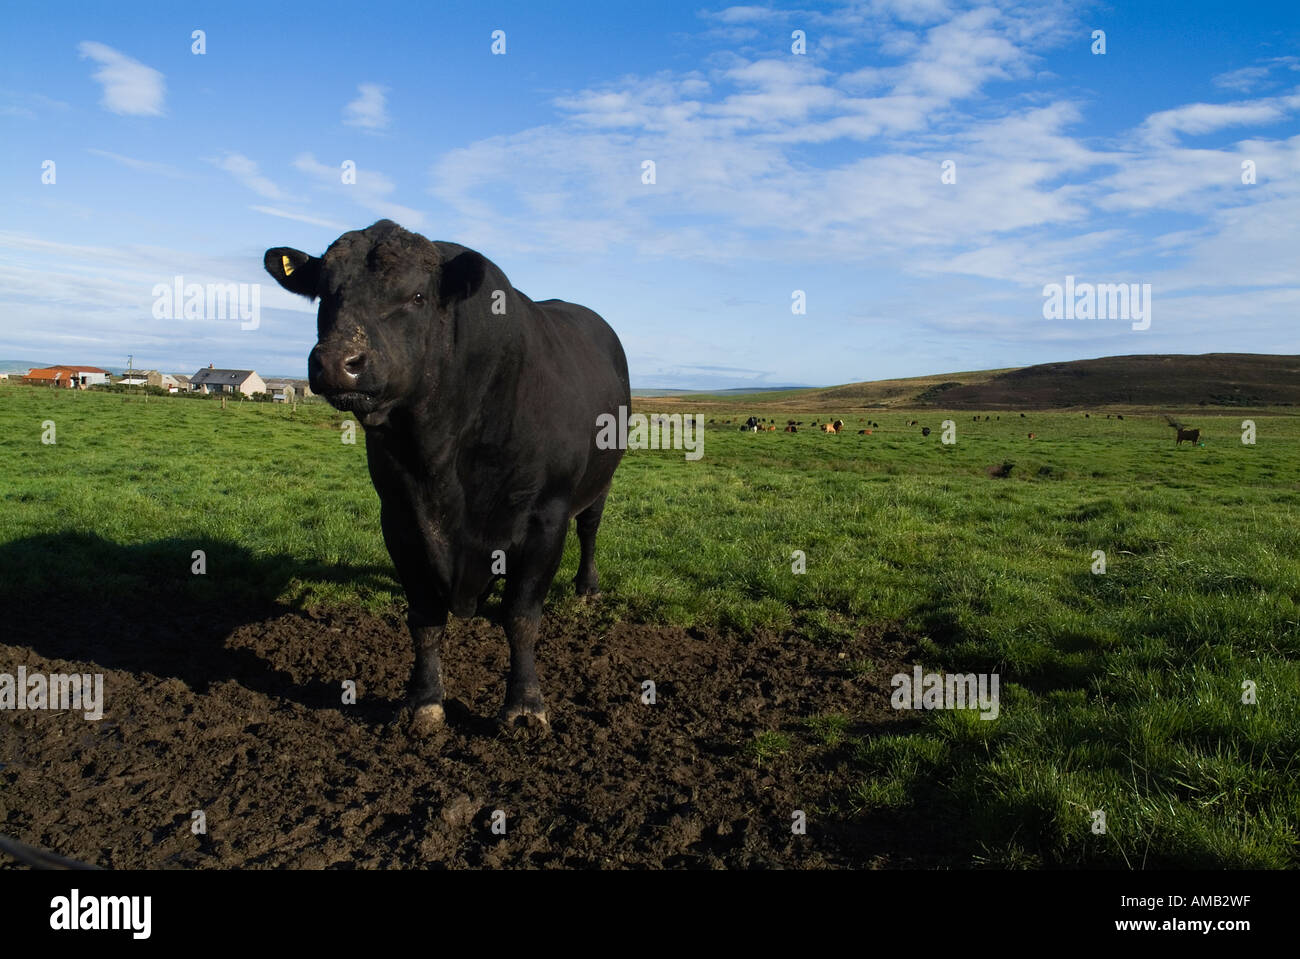 dh Cow ANIMALS UK Aberdeen Angus Beef bull with cow cattle in field Orkney british animal pedigree farming Stock Photo